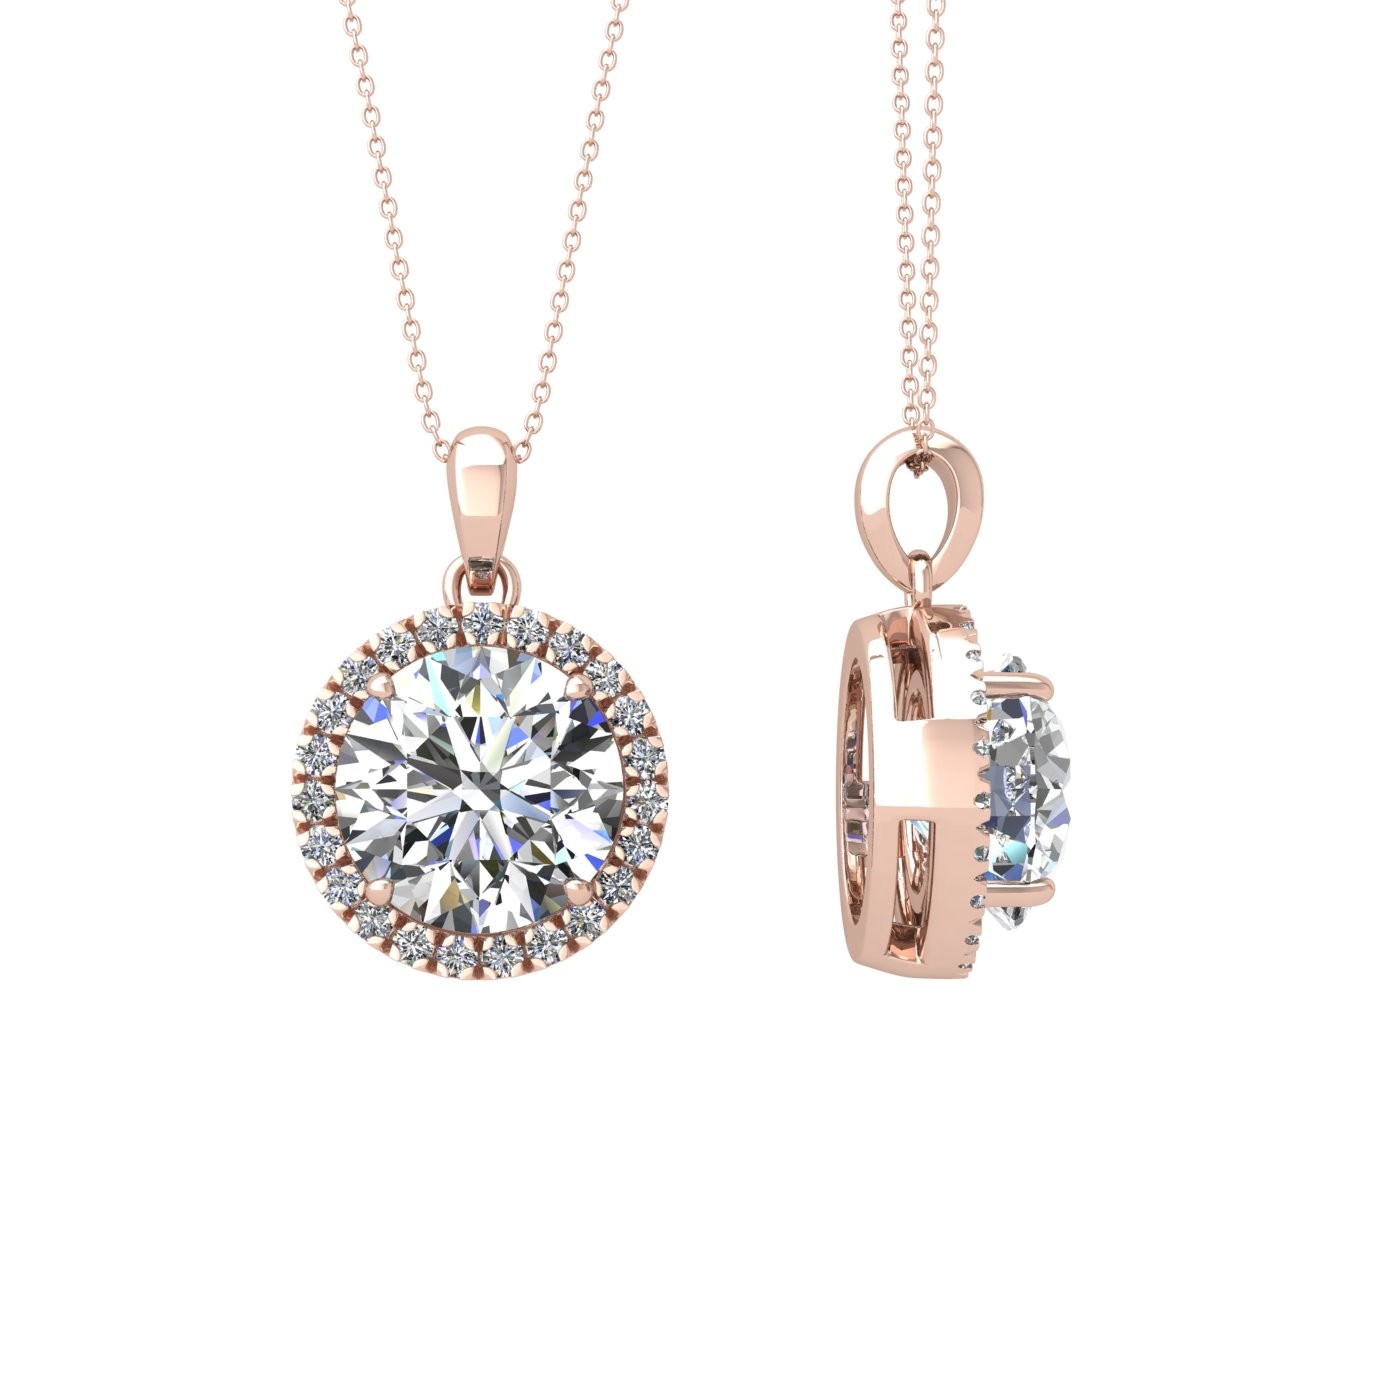 18k rose gold  2 ct 4 prong round shape diamond pendant with diamond pavÉ set halo including chain seperate from the pendant Photos & images